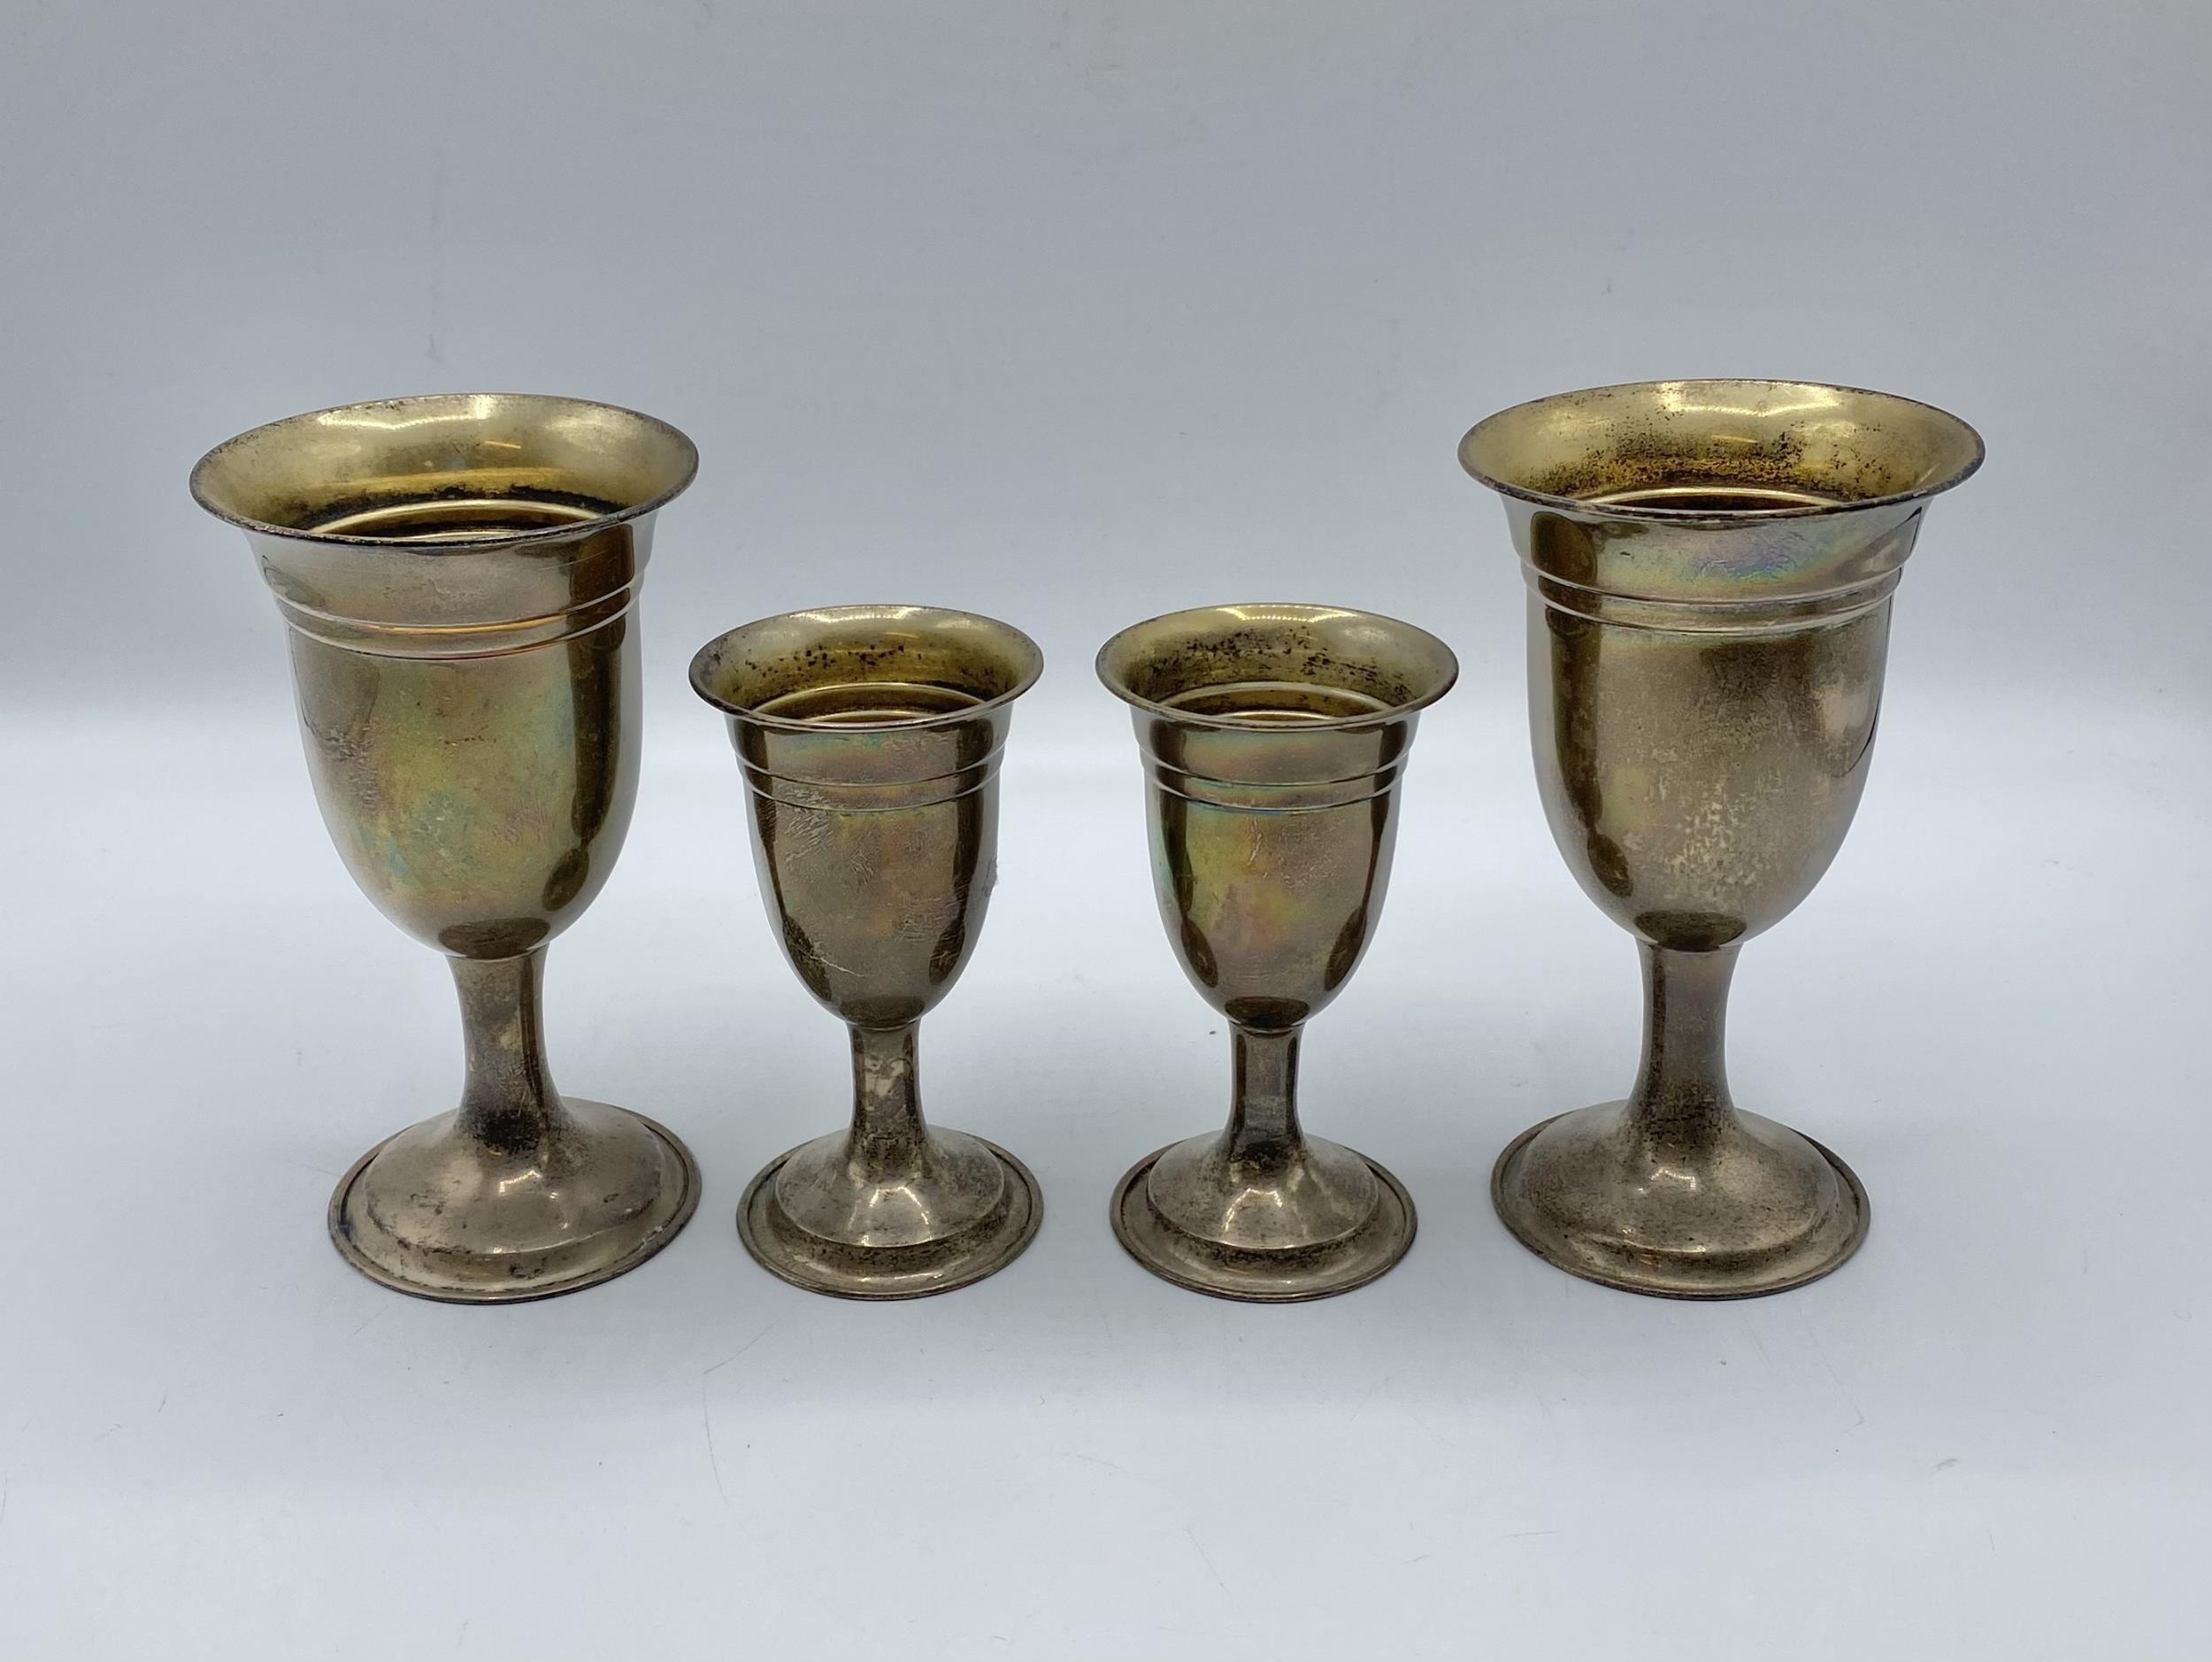 A pair of sterling silver goblets together with a smaller pair of matching silver goblets by W I